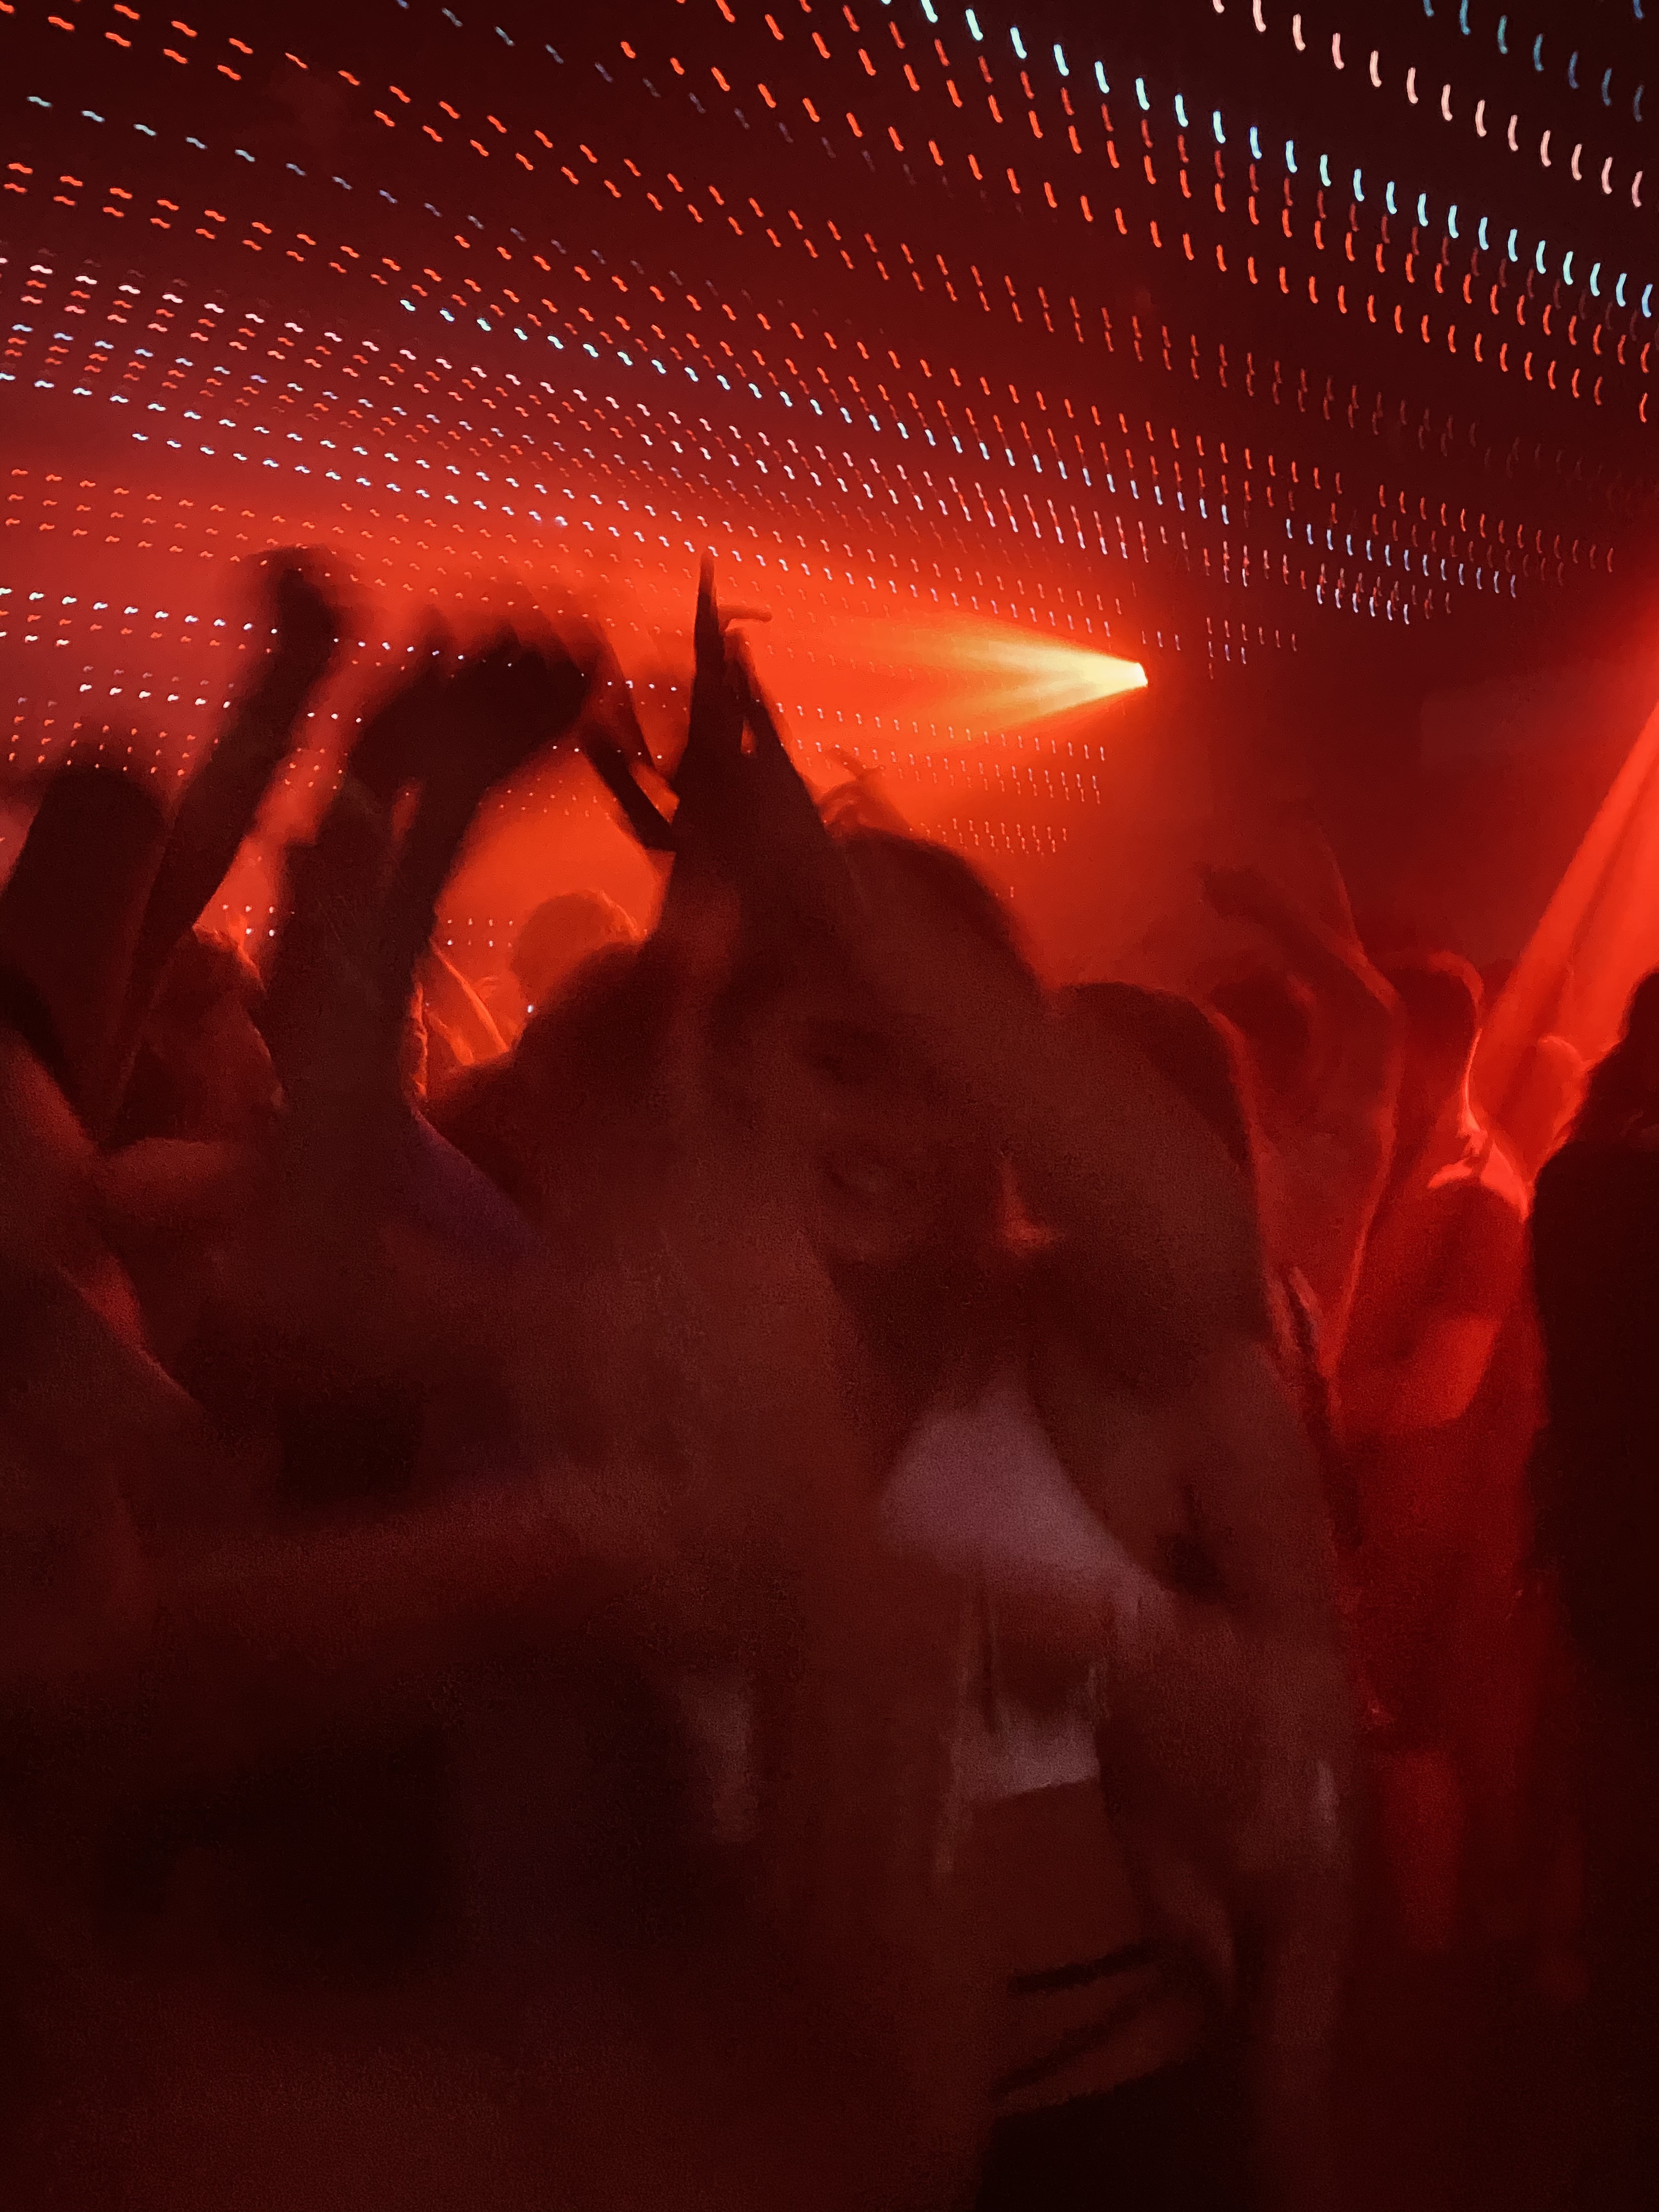 Figures dancing in a club under red and white strobe lights. 